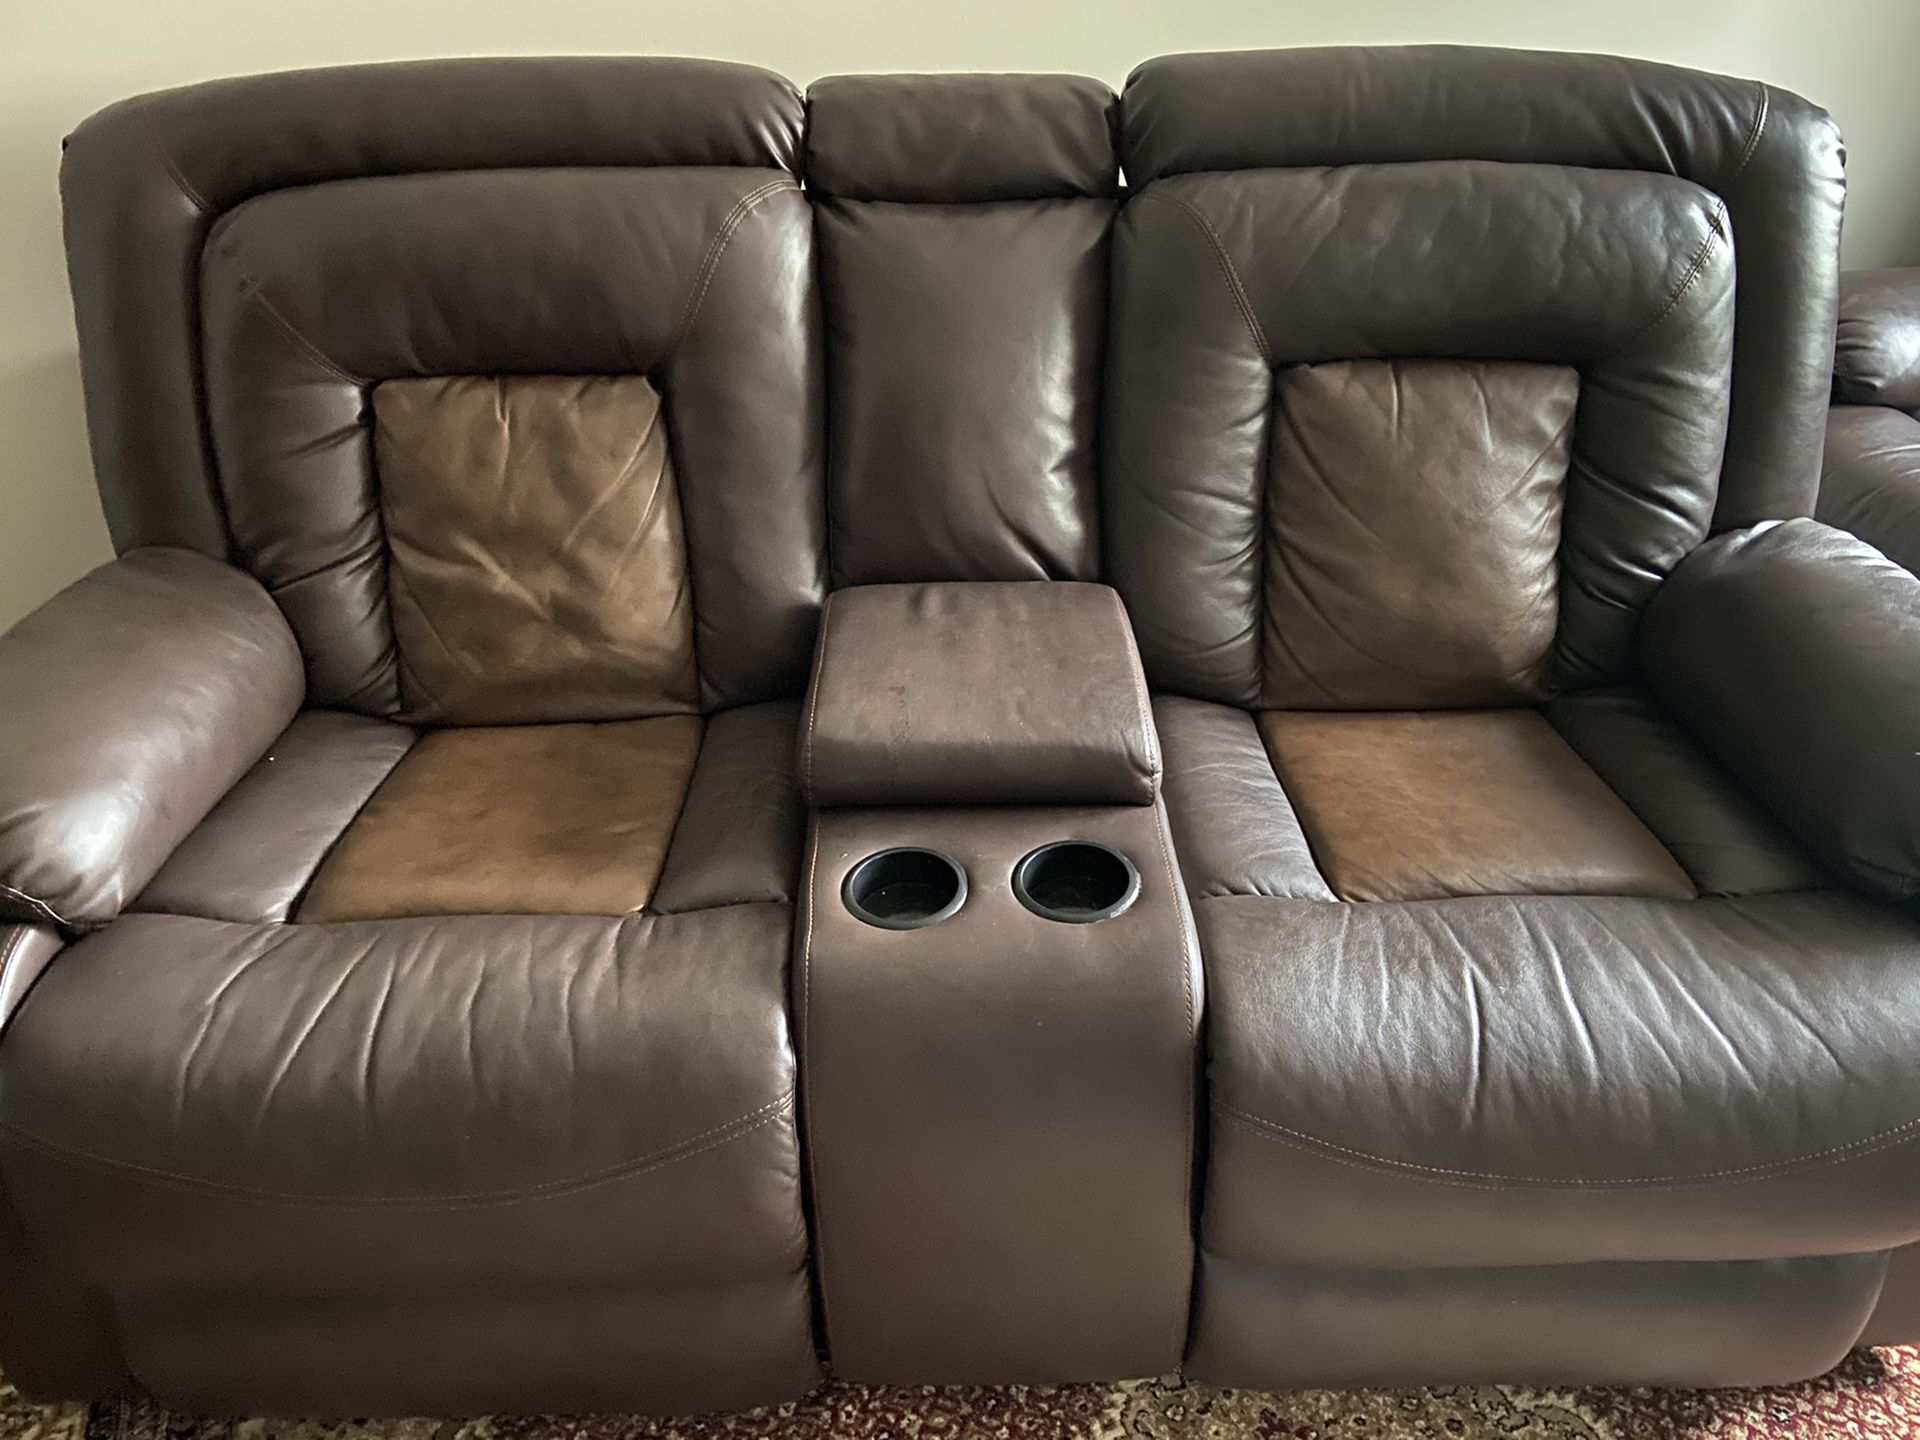 Recliner couch ,no rupture ,like new , reason off sale not enough space for it